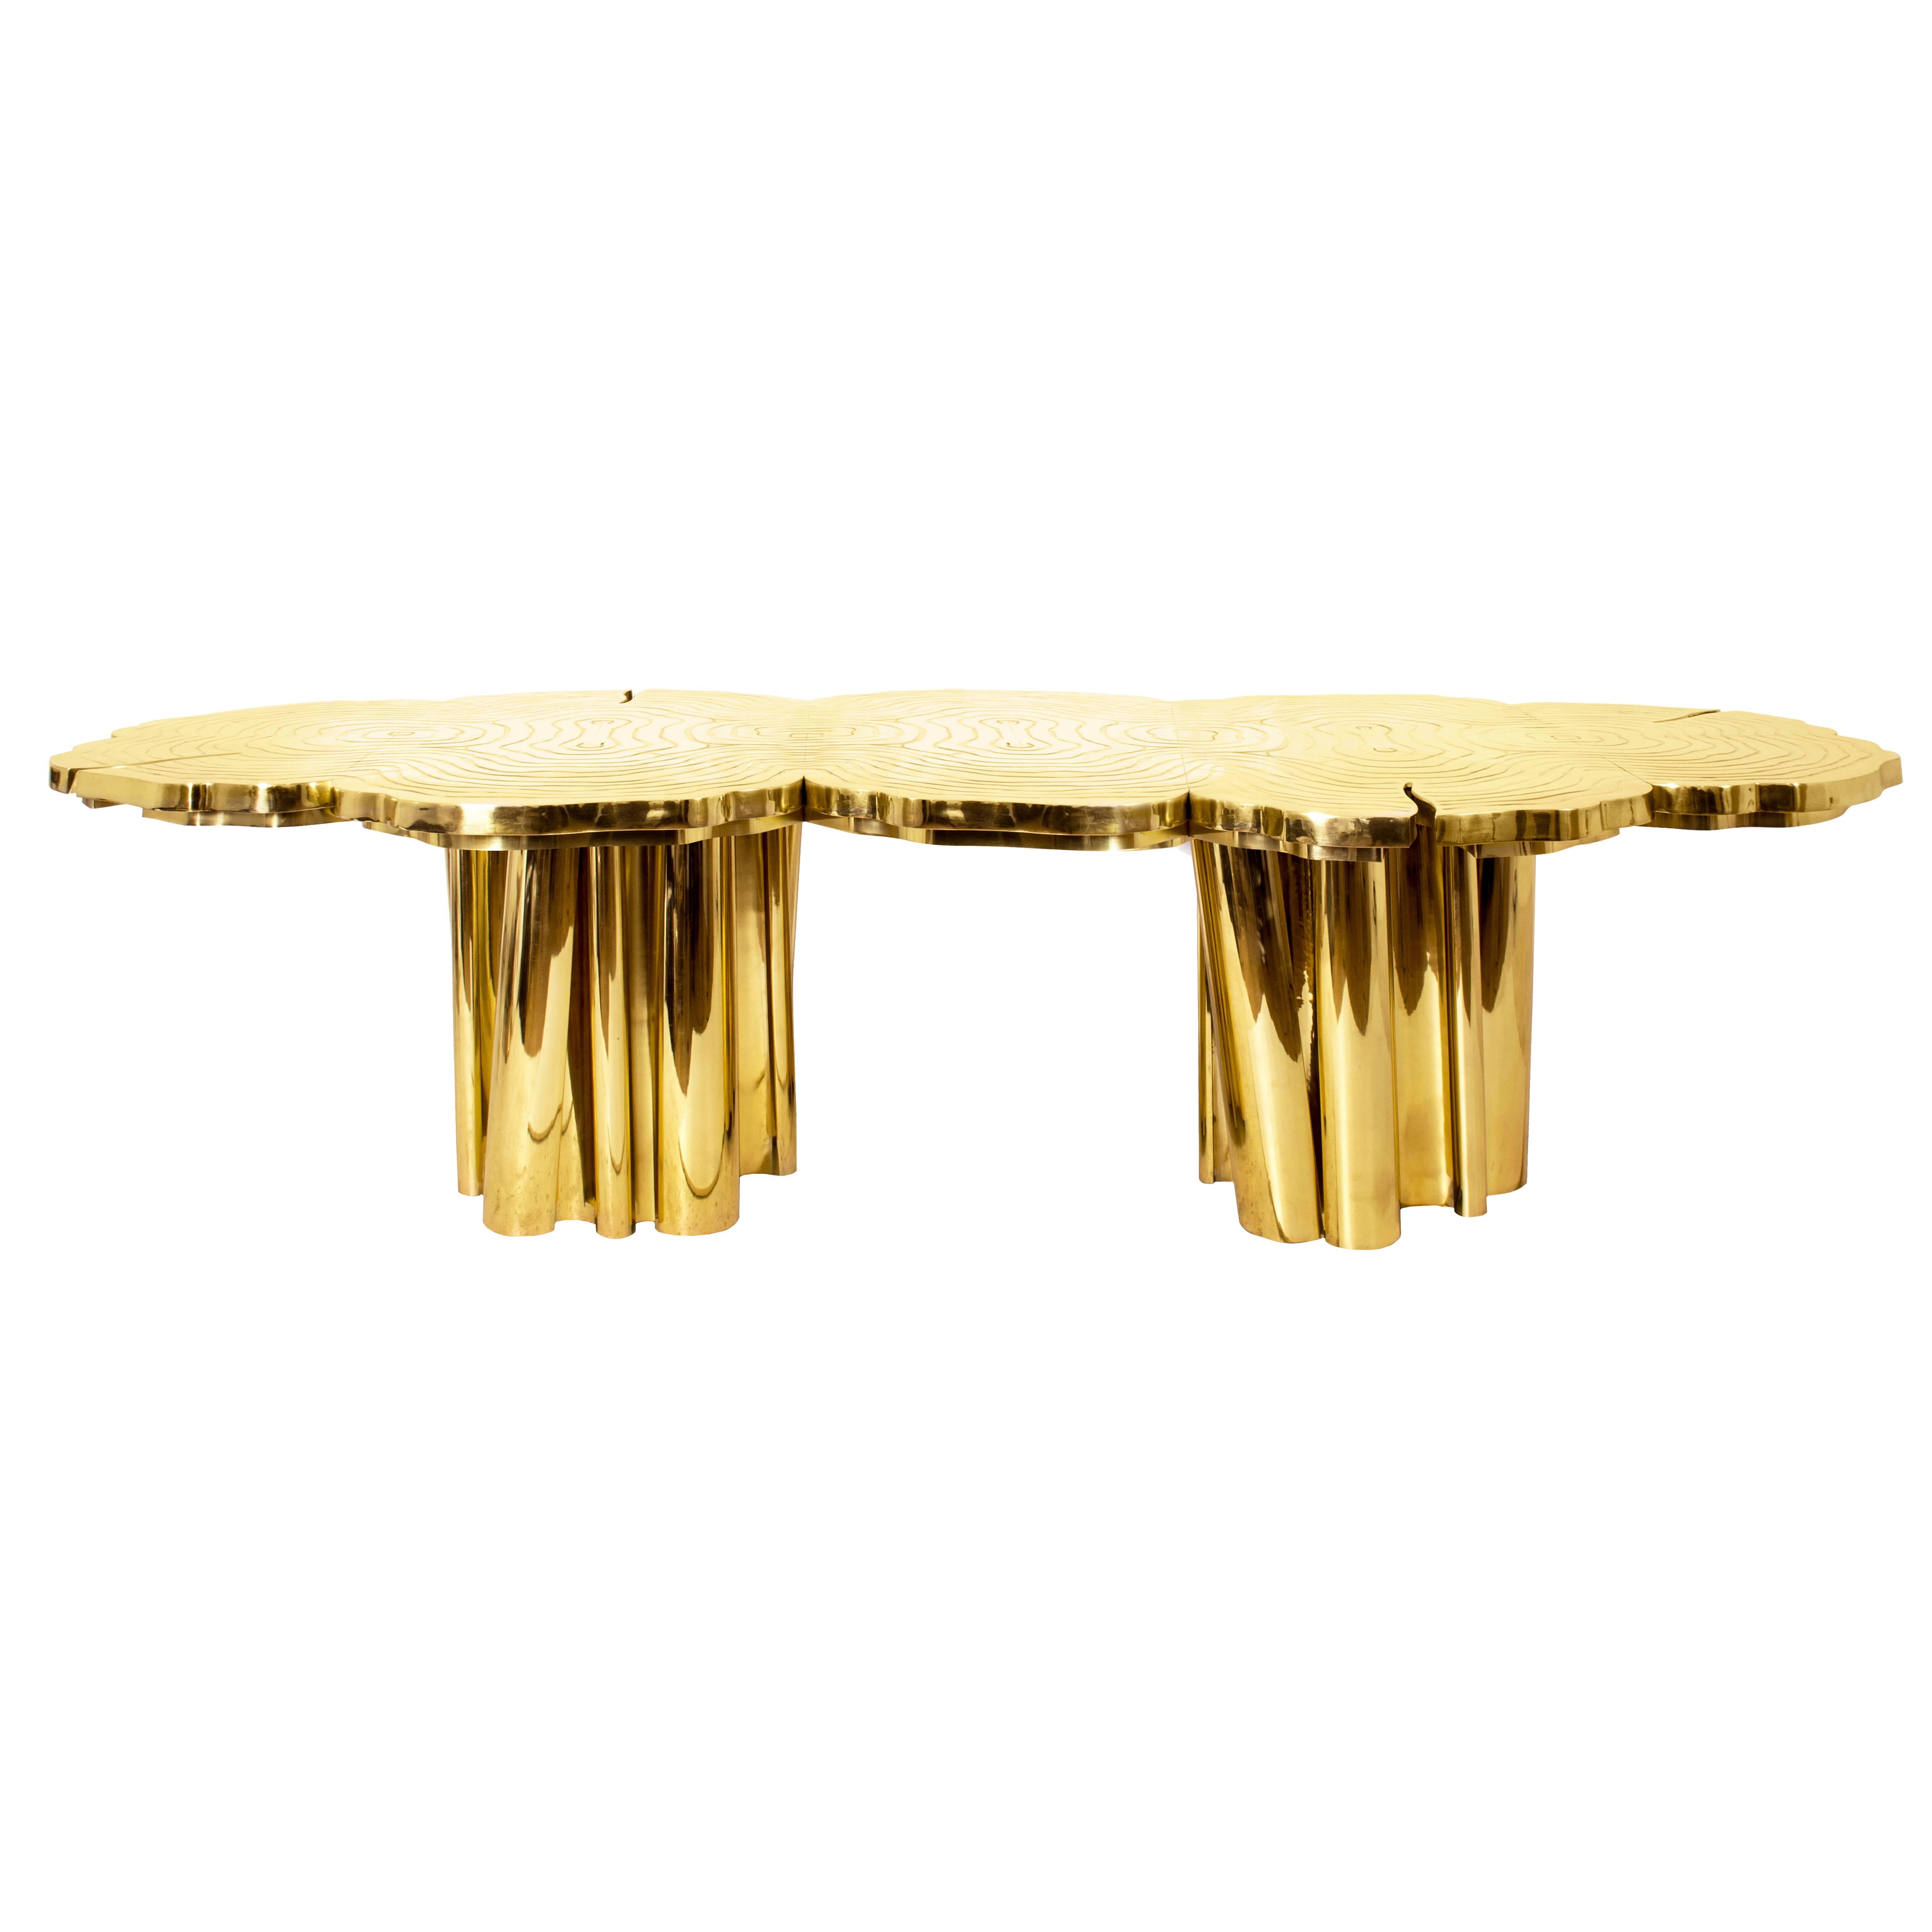 Boca Do Lobo, "Fortuna" Model, Dining Table for Eight People, Limited Edition